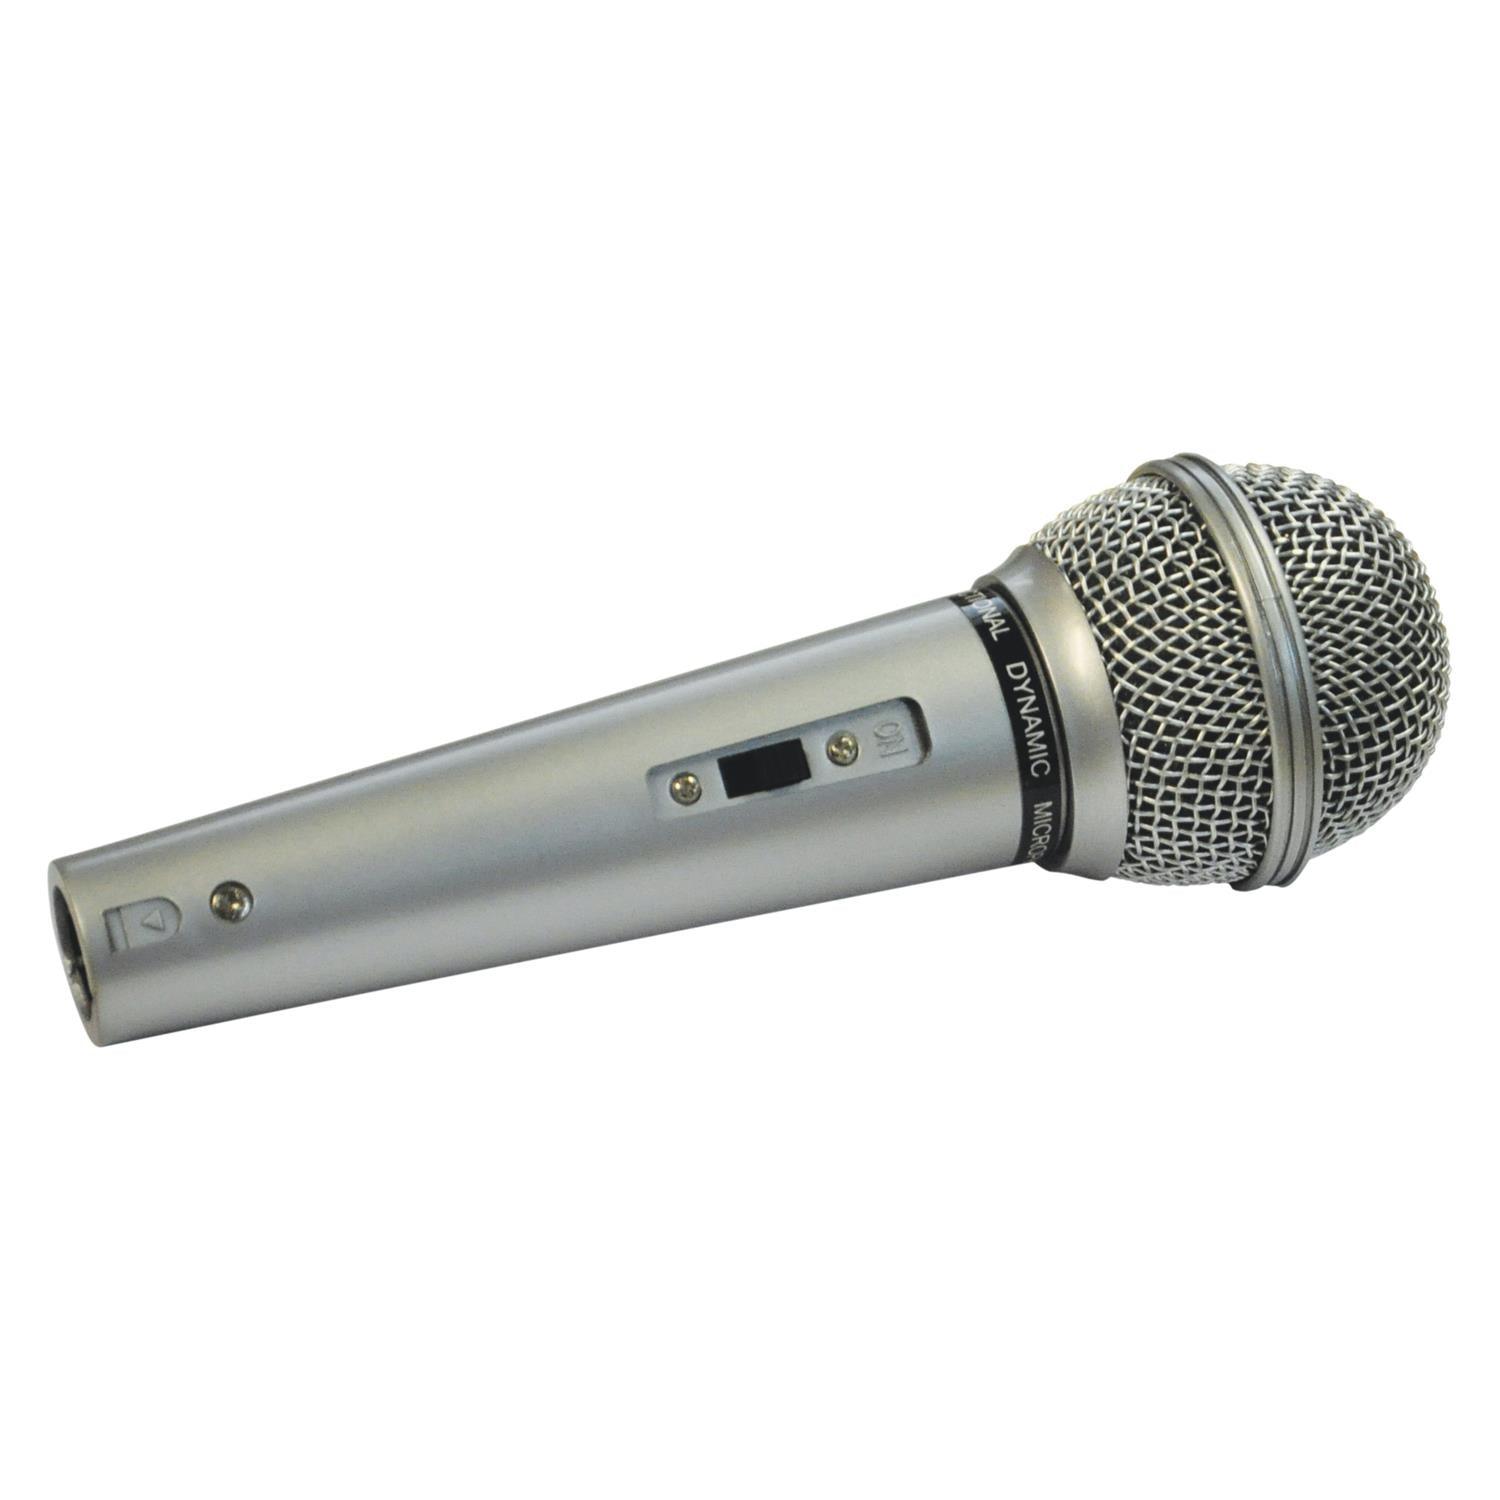 Mr Entertainer Dynamic Handheld Karaoke Microphone With Lead 600 Ohm - DY Pro Audio